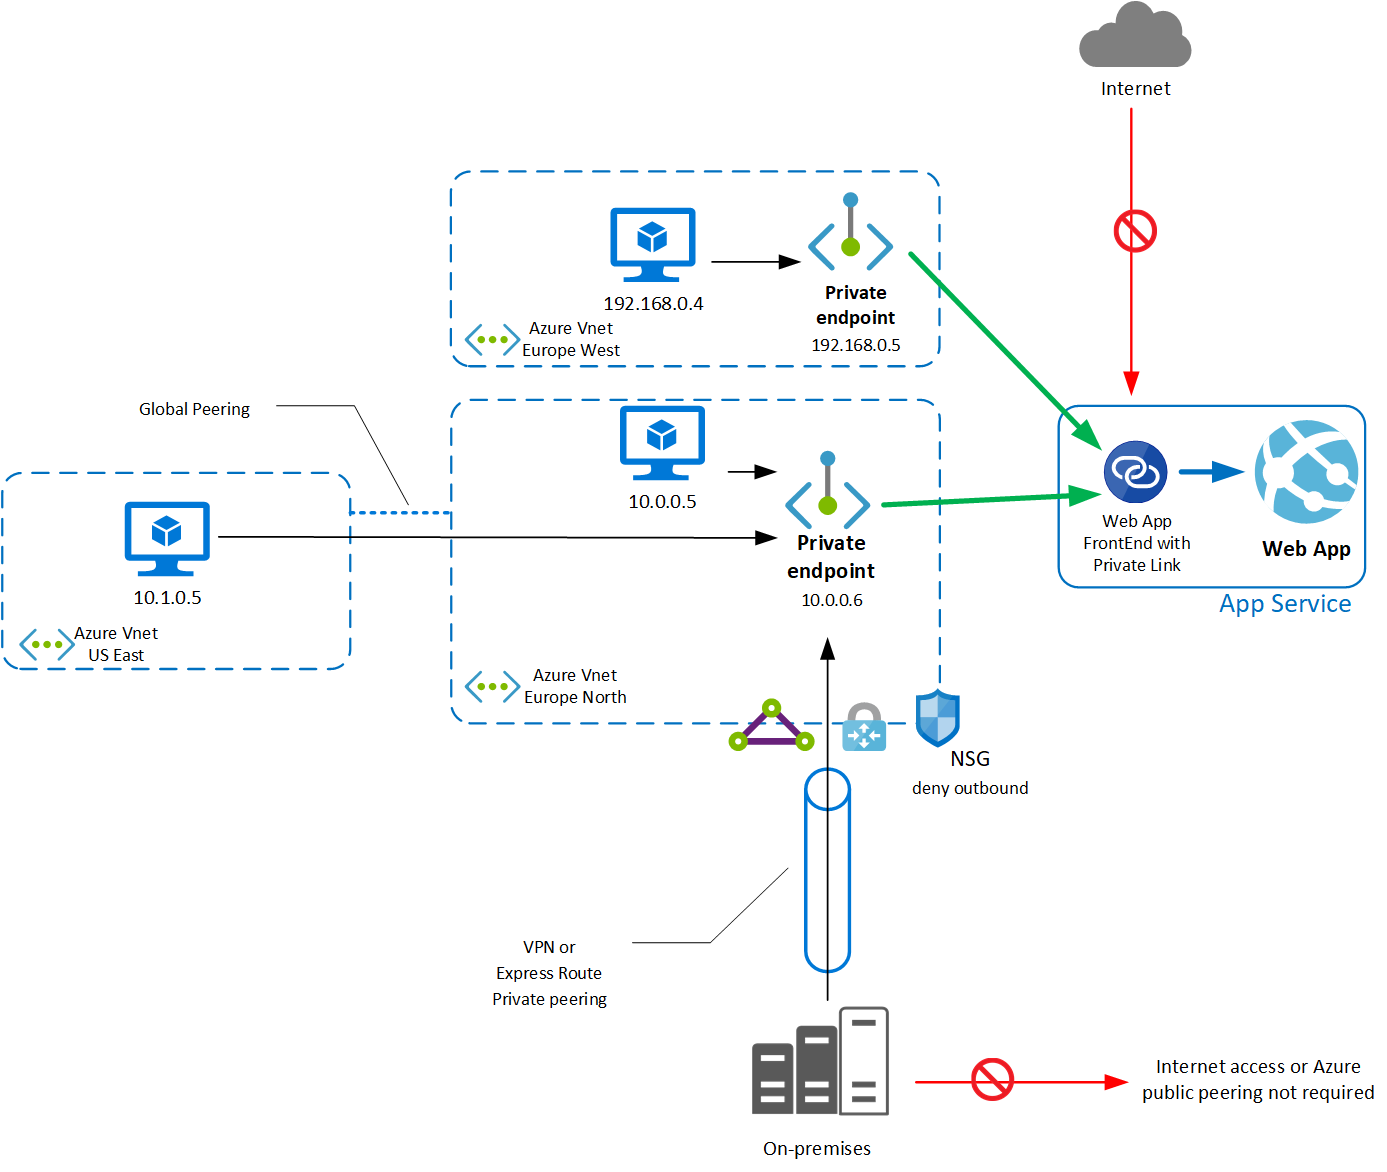 azure-function-app-with-private-endpoint-secured-azure-storage-code